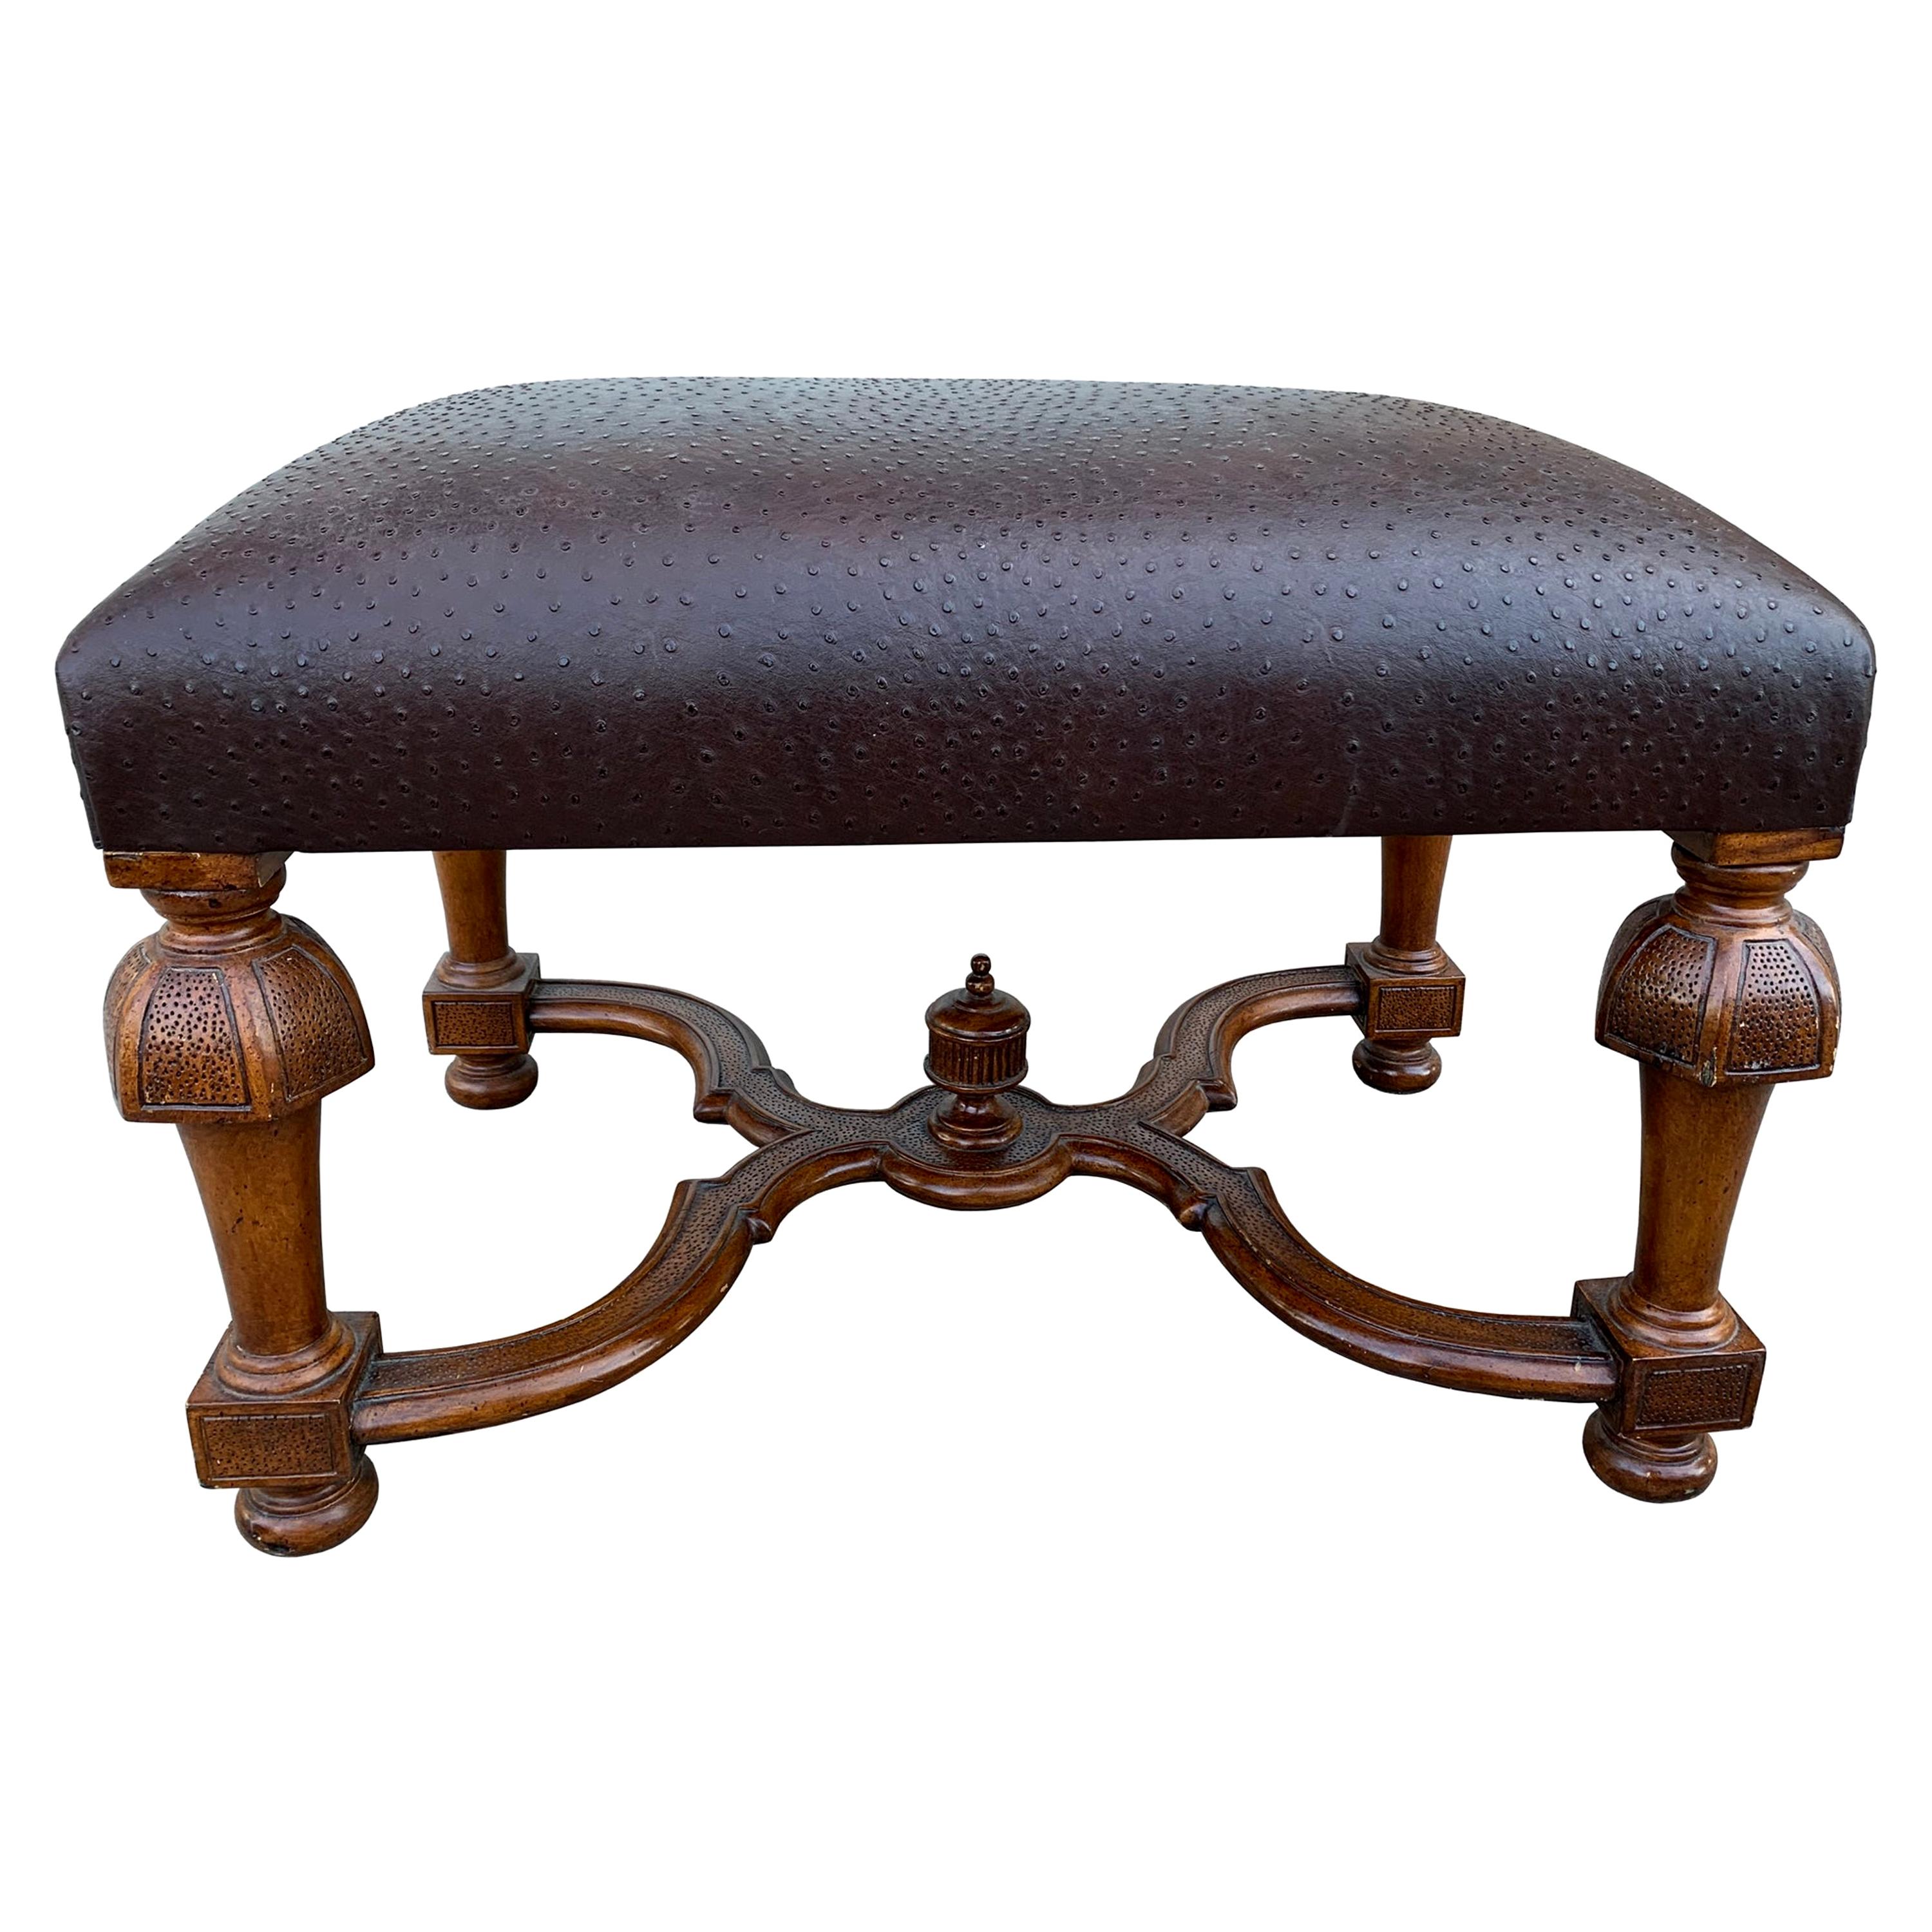 Vintage Bench/Ottoman Upholstered in Faux Ostrich Leather